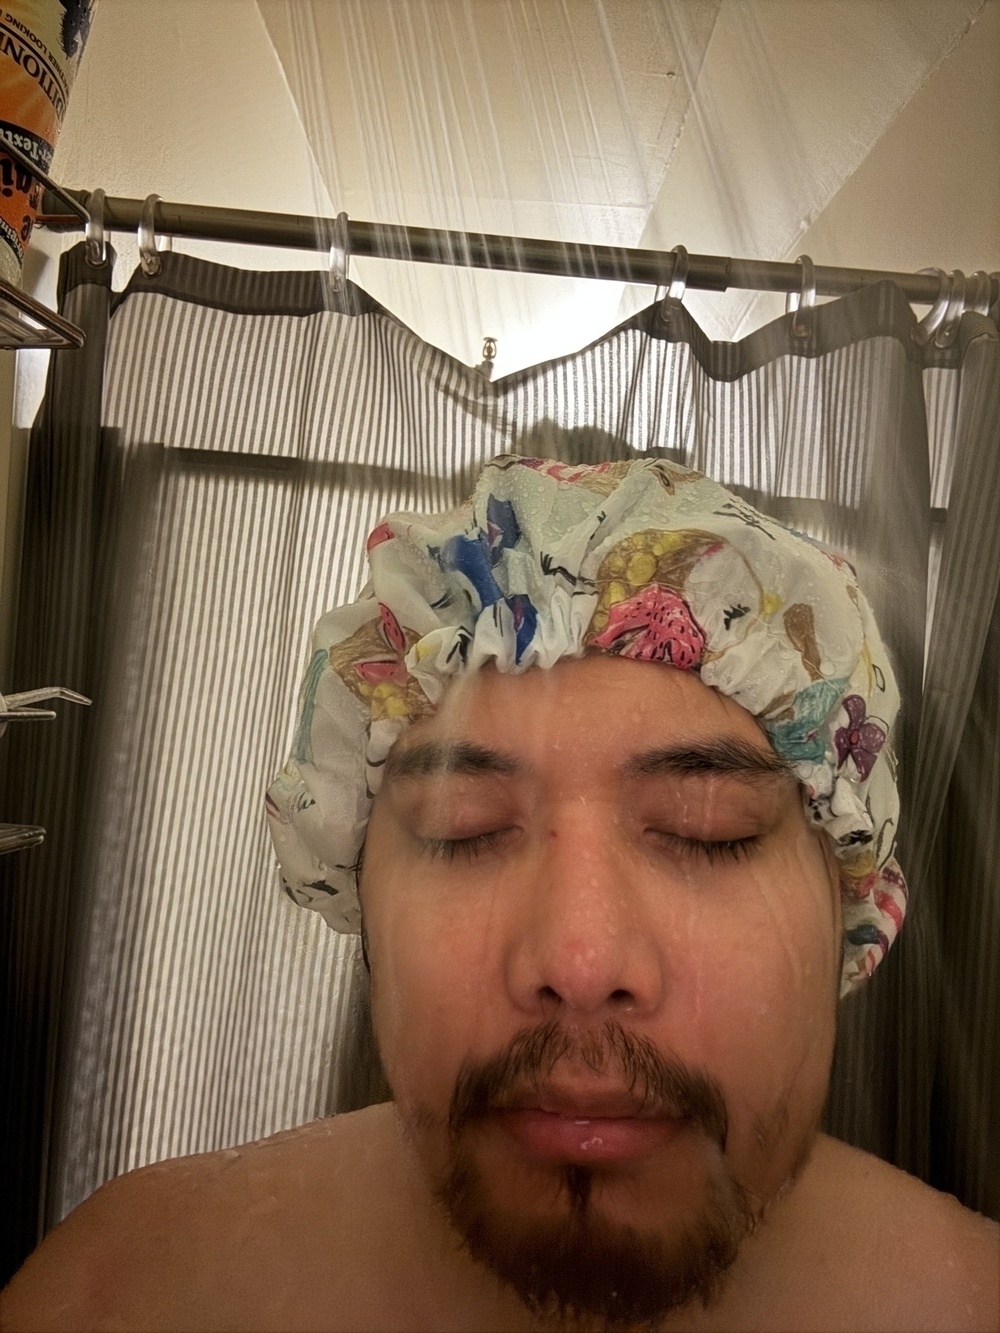 A smiling person wearing a floral shower cap is taking a shower, holding up a peace sign with their right hand.